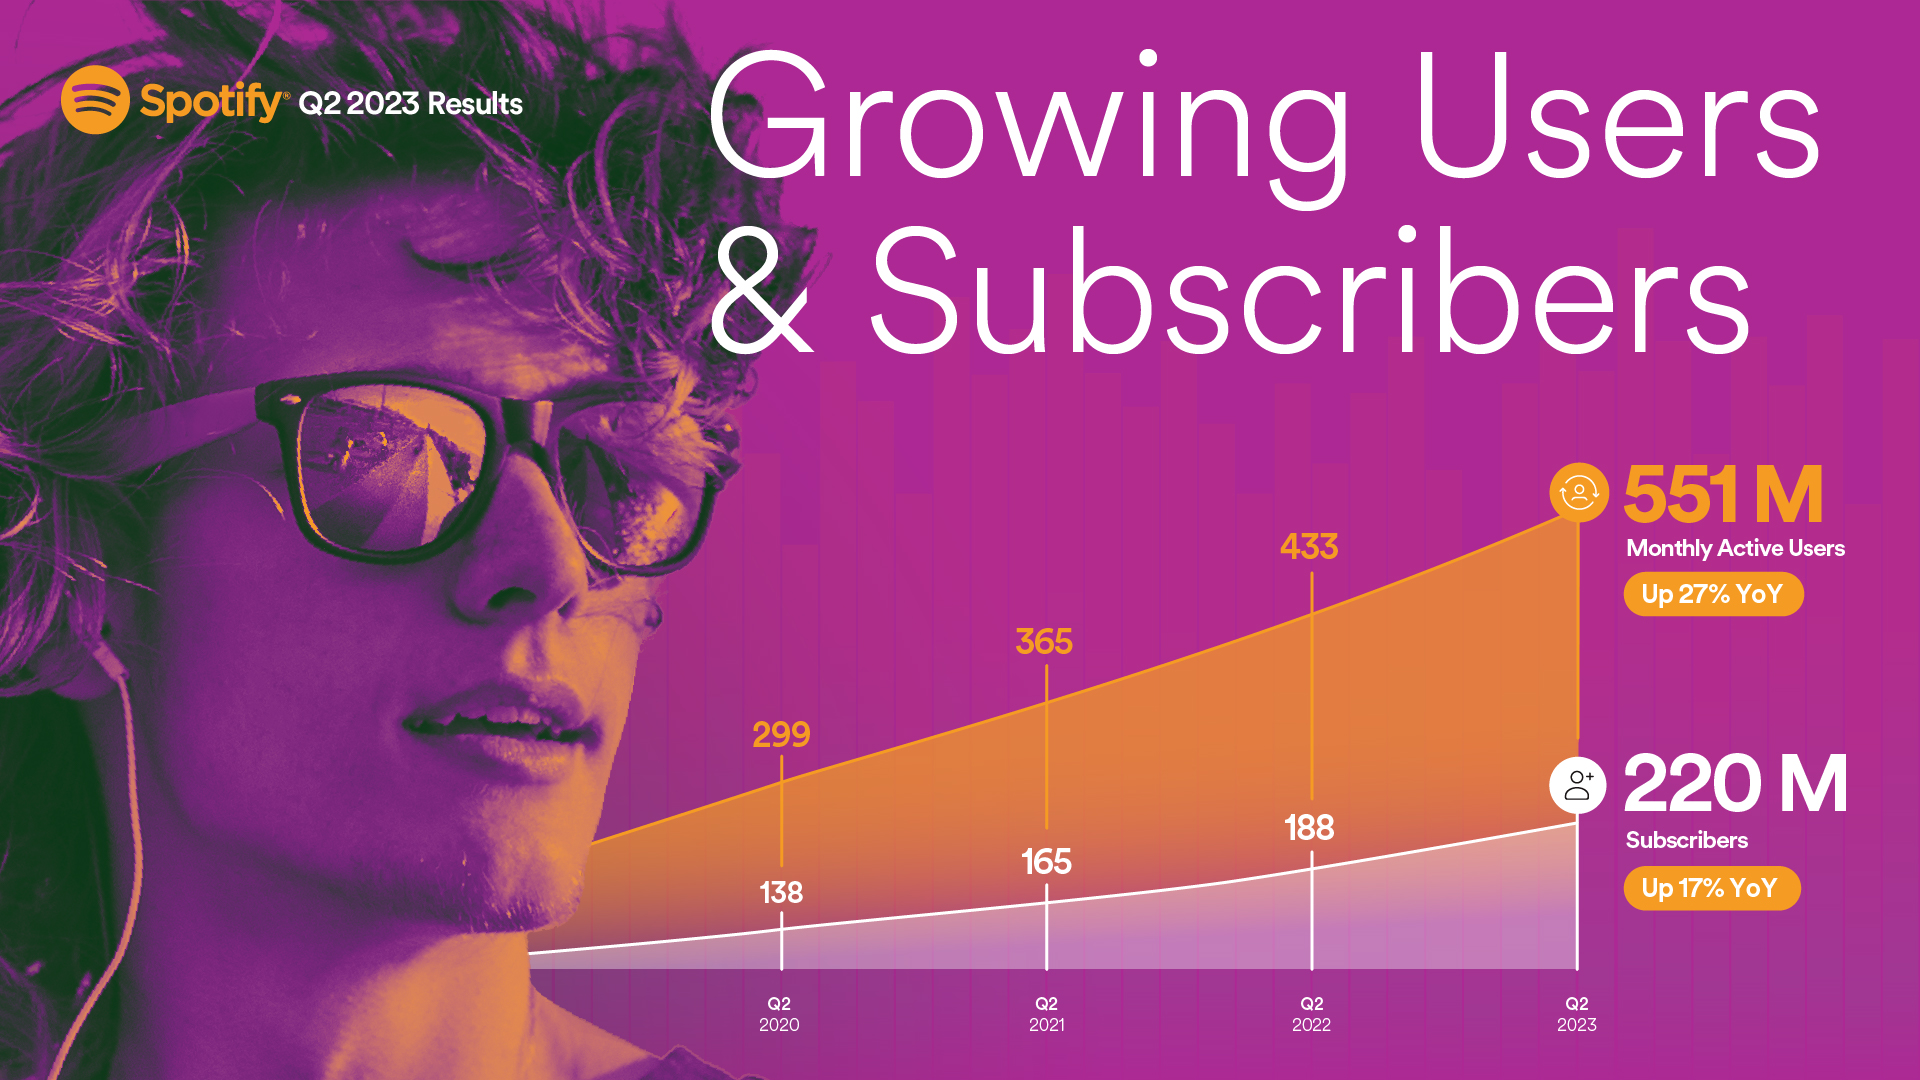 Spotify's Q2 2023 reults showing monthly active users and subscribers